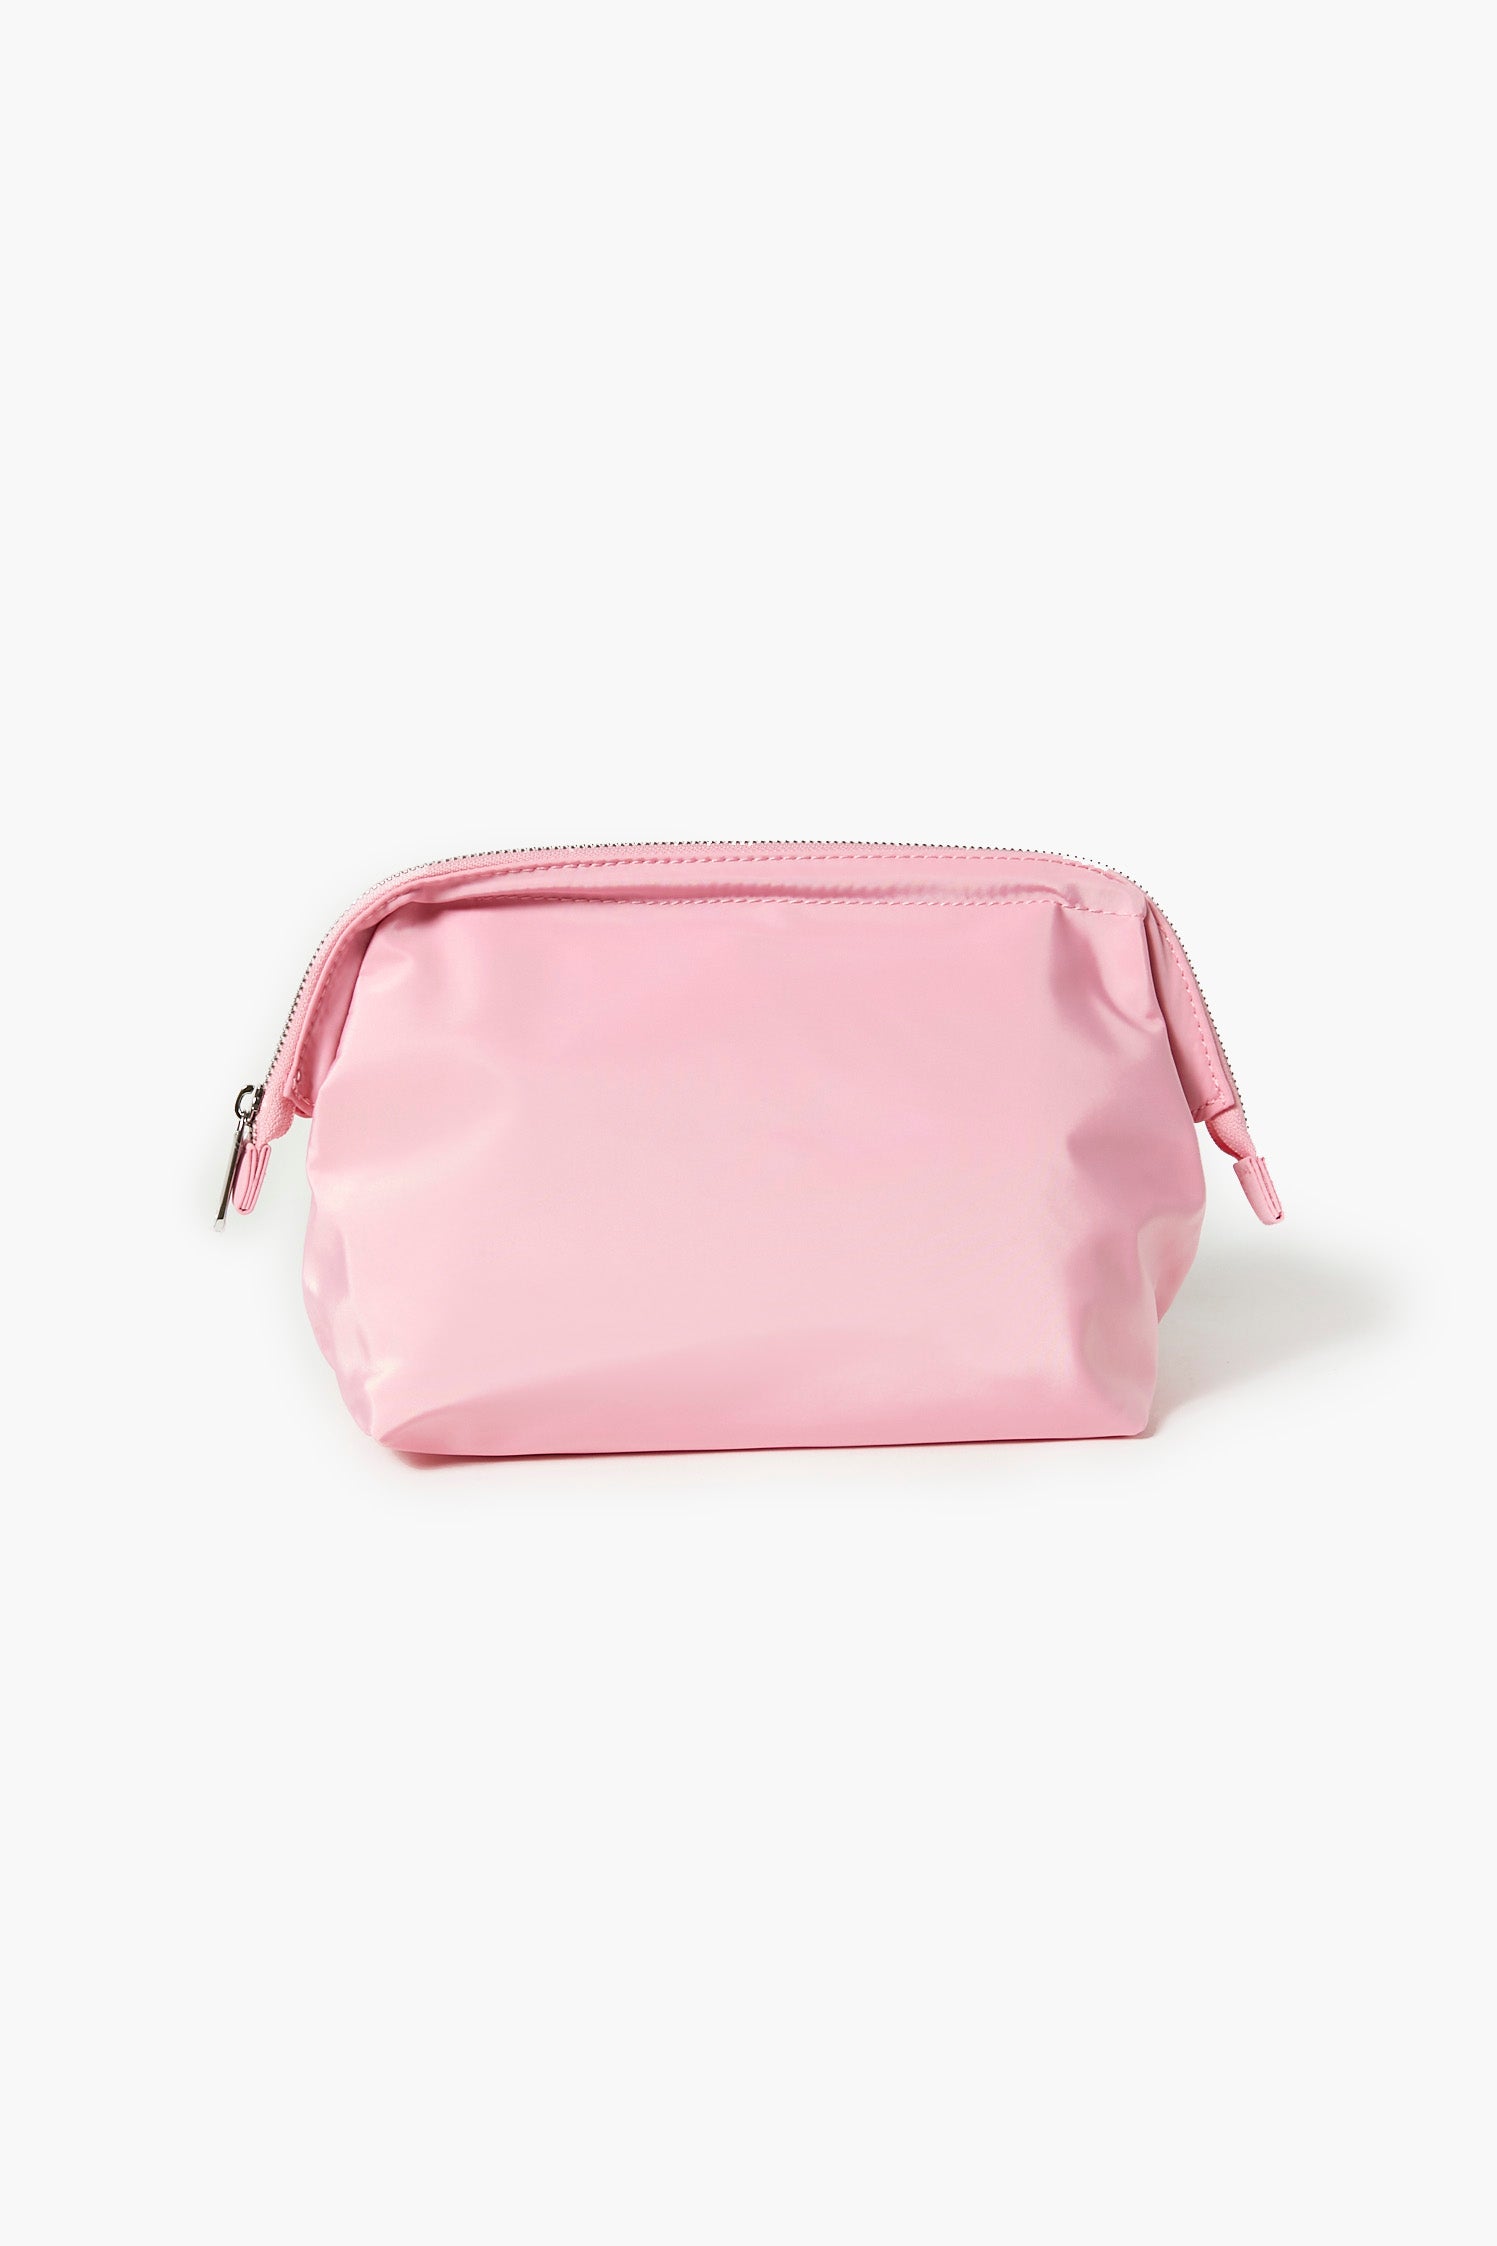 Makeup Pouch Set Pretty in Pink by Pop Ups